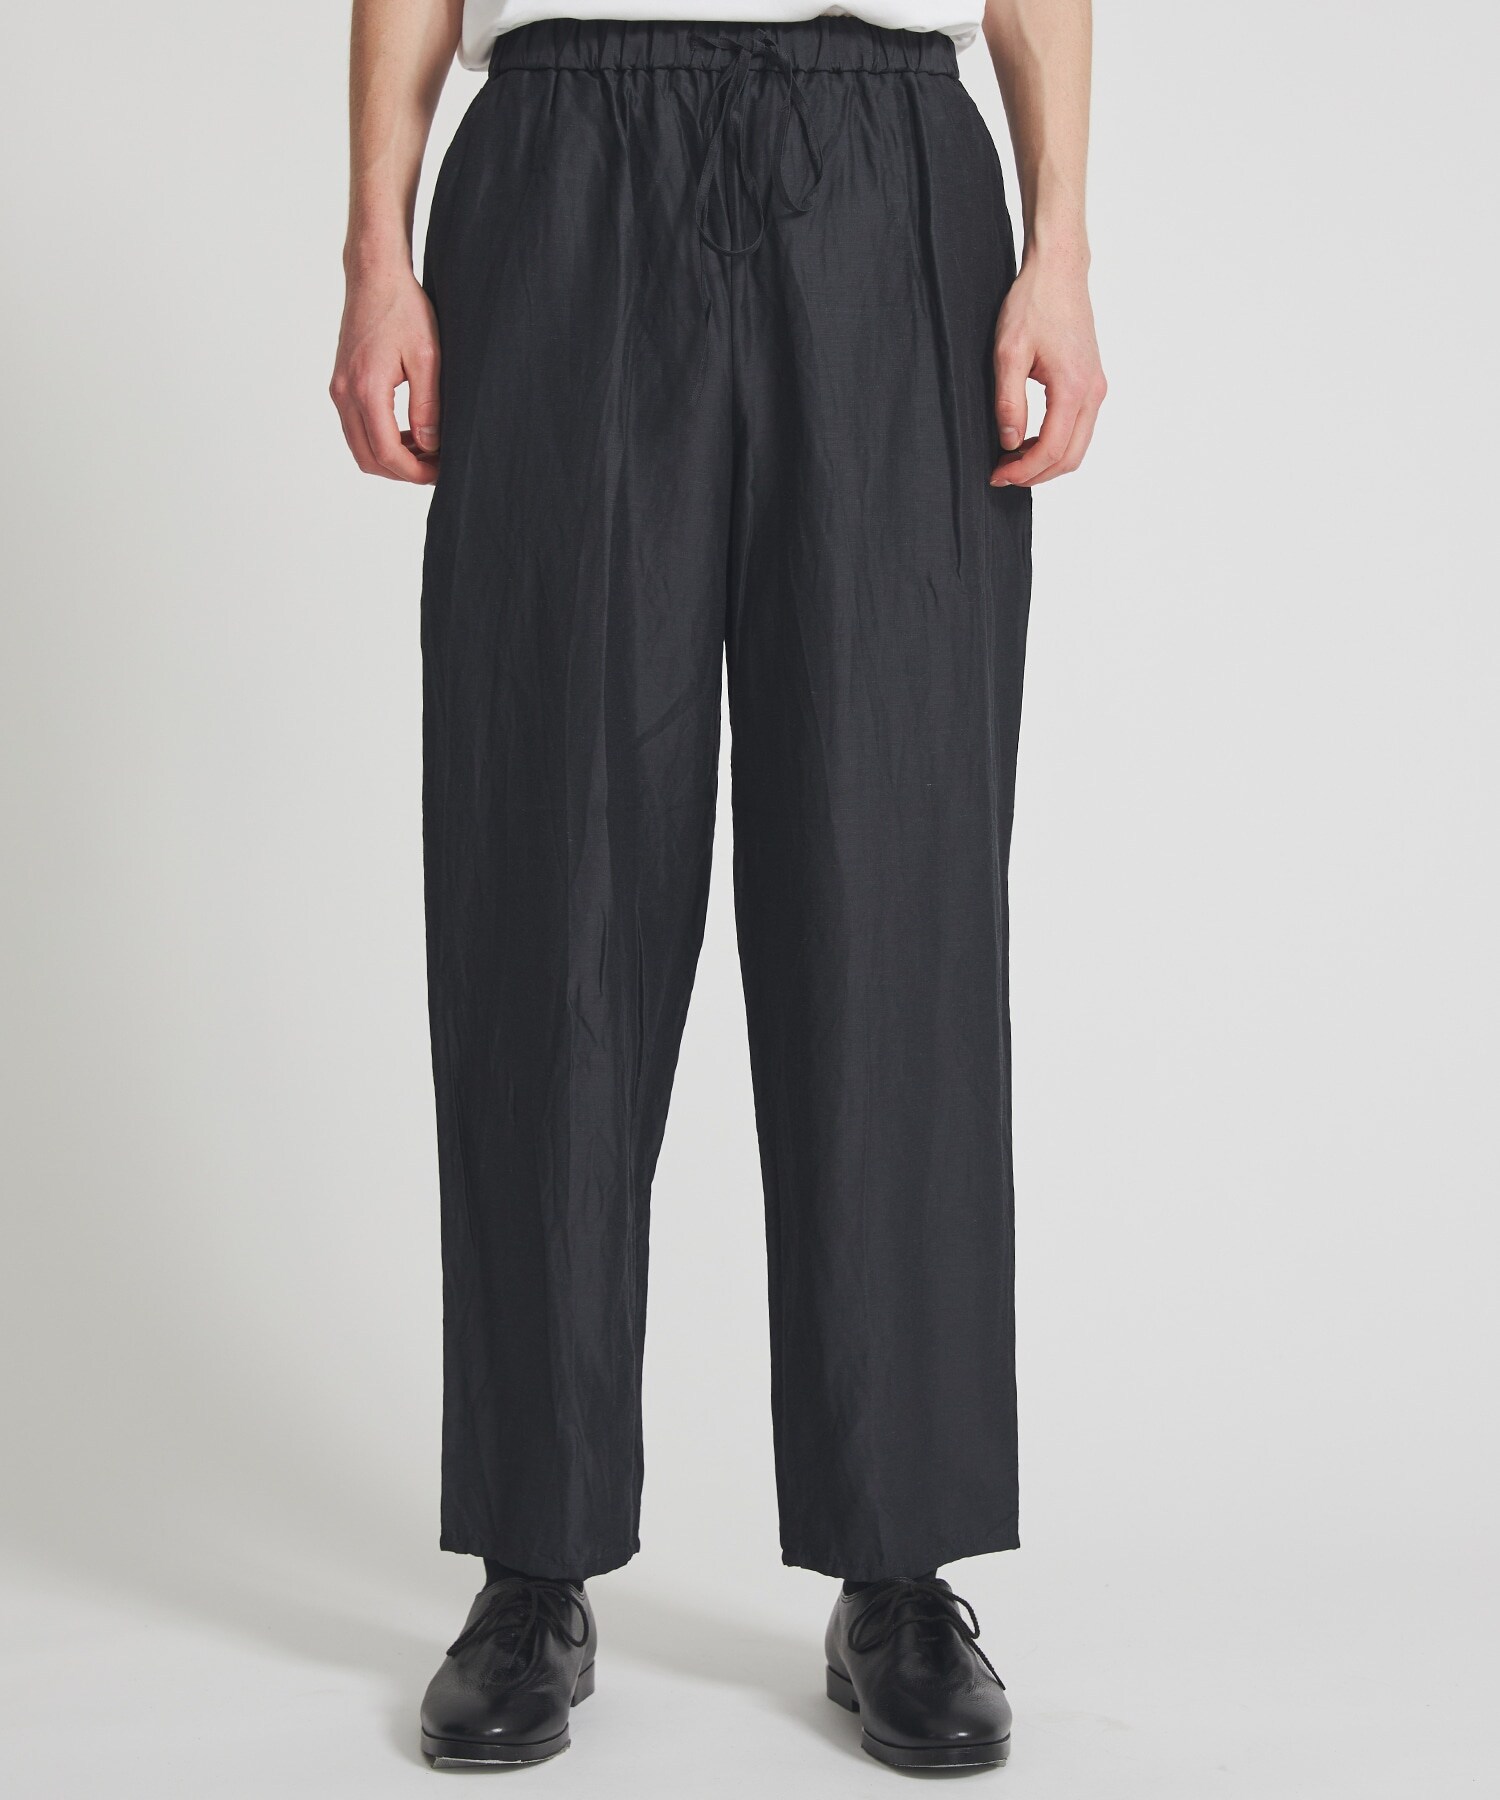 COCOON FIT EASY PANTS